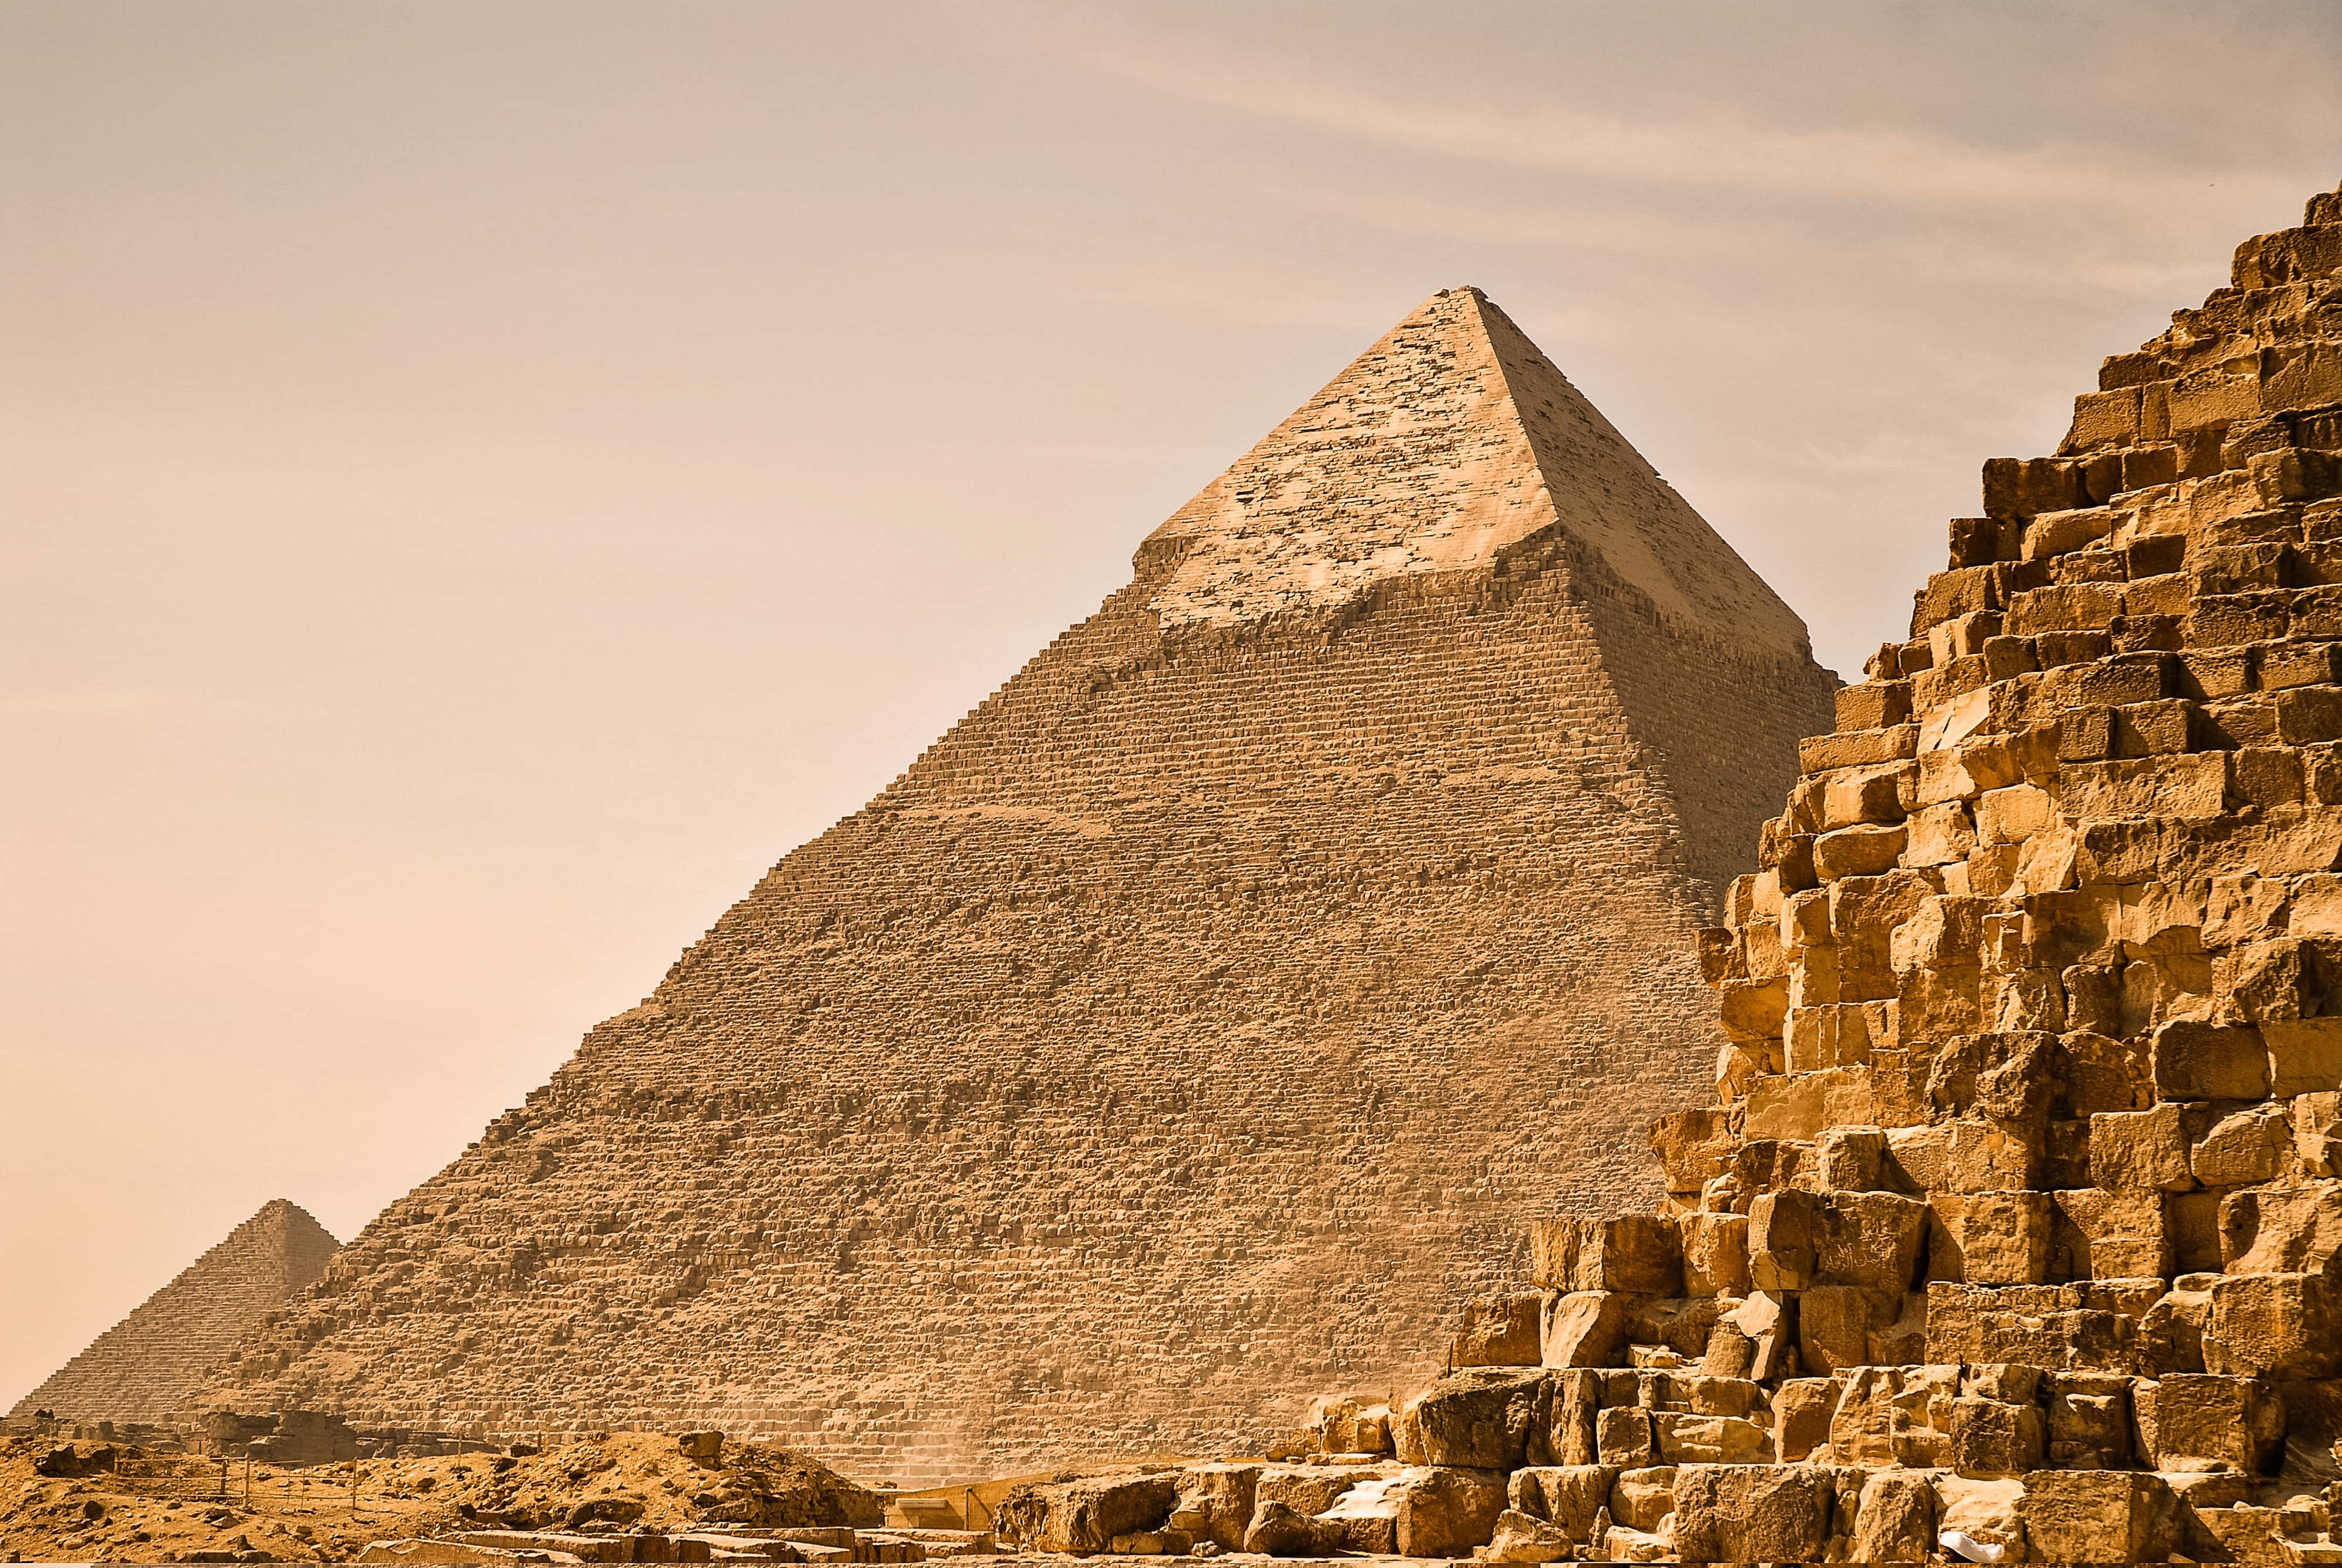 The Great Pyramids facts